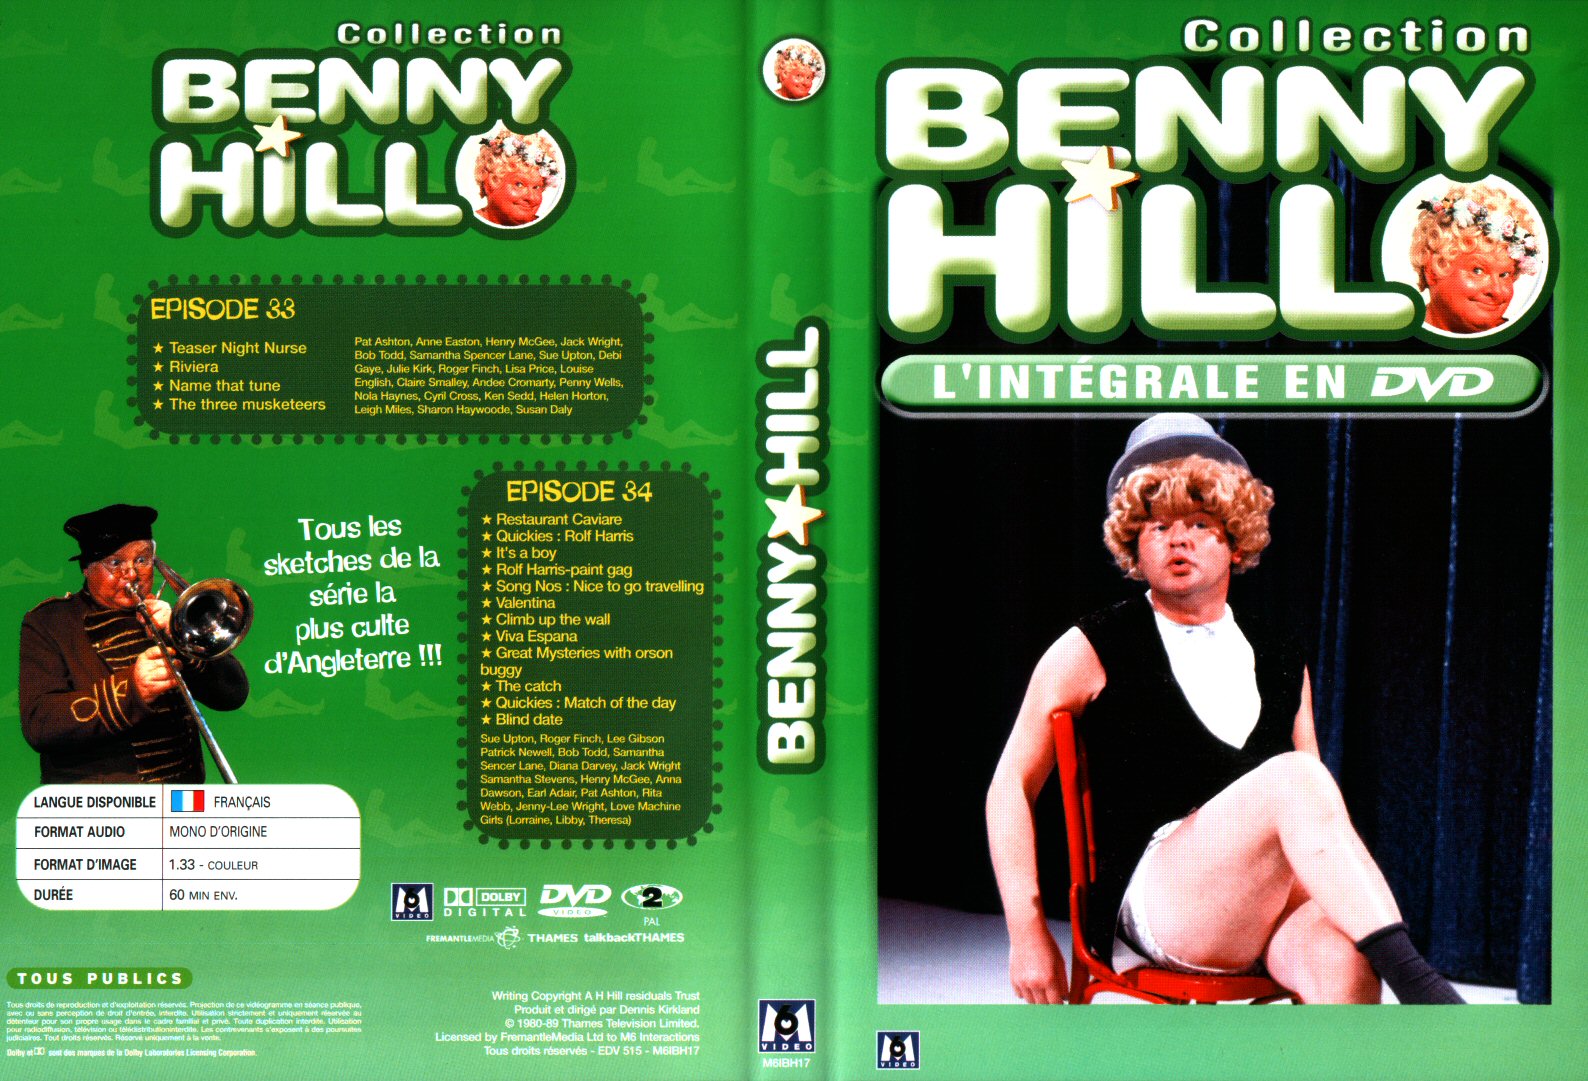 Jaquette DVD Benny Hill collection Episodes 33-34